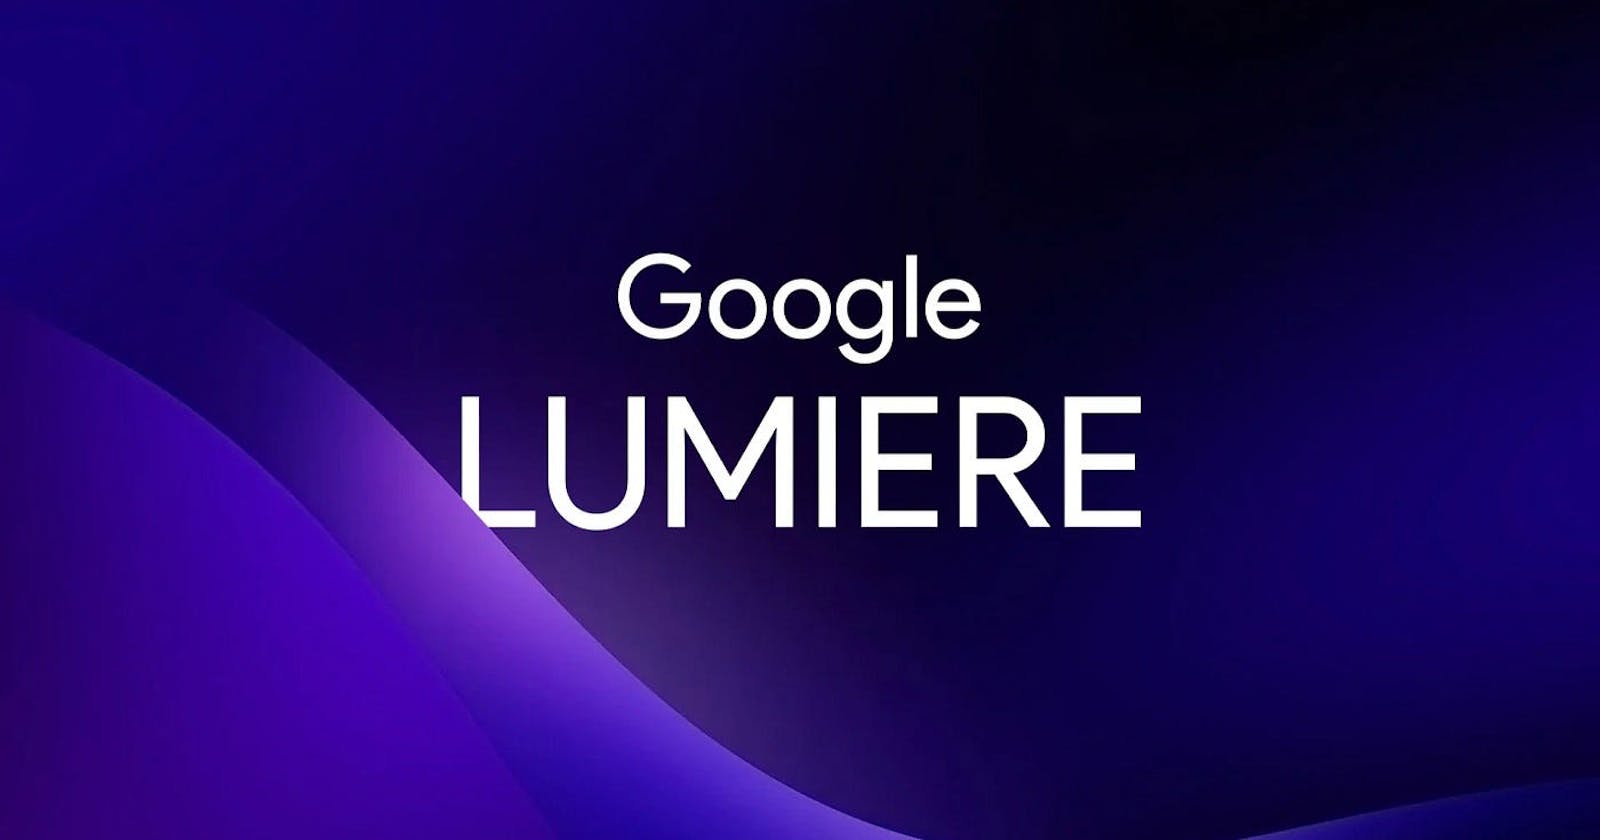 Google's Lumiere: Create Videos with Just Words!